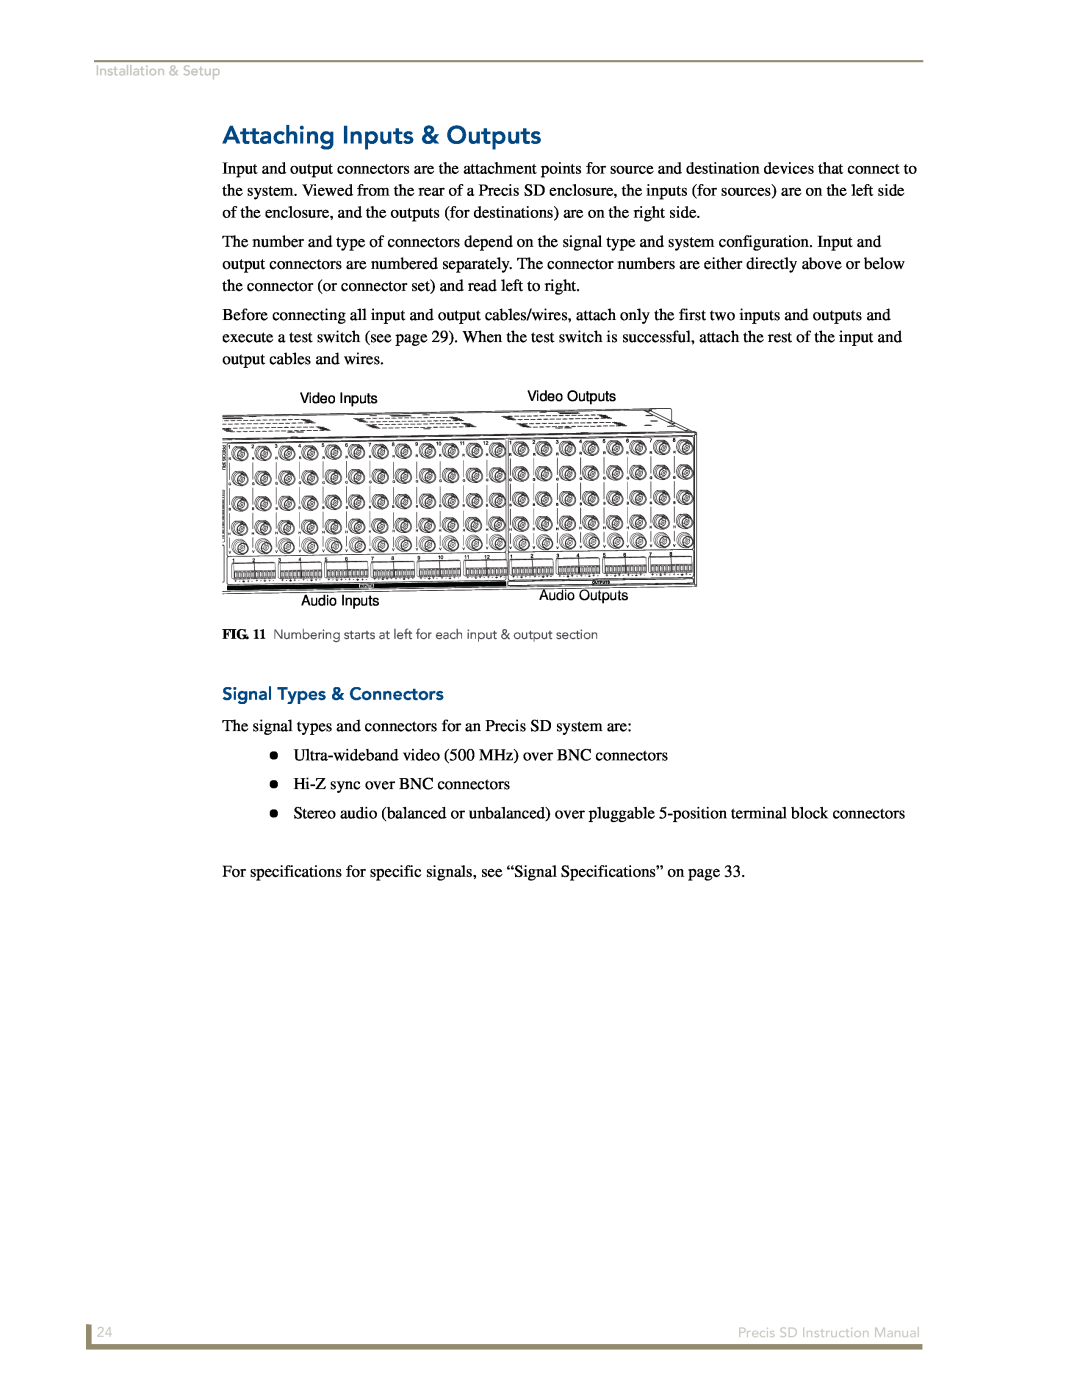 AMX Precis SD instruction manual Attaching Inputs & Outputs, Signal Types & Connectors 